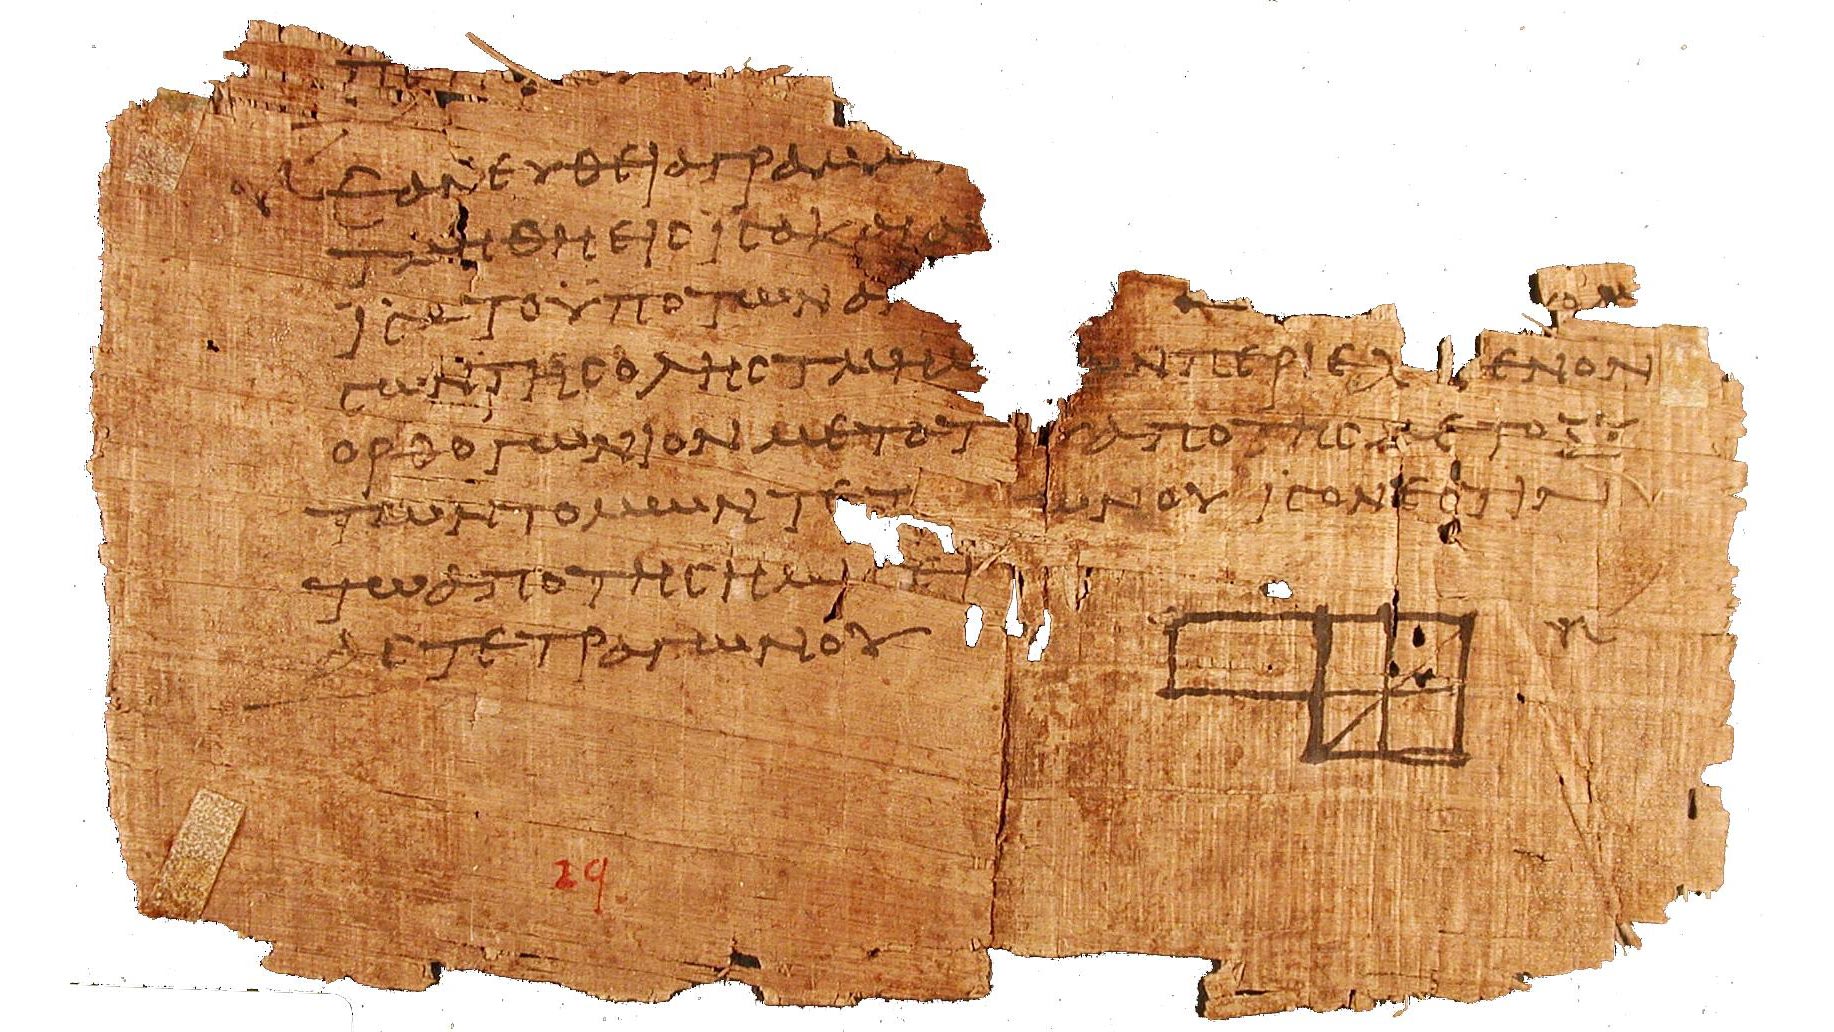 One of the oldest surviving fragments of Euclid's Elements, found at Oxyrhynchus and dated to circa AD 100.